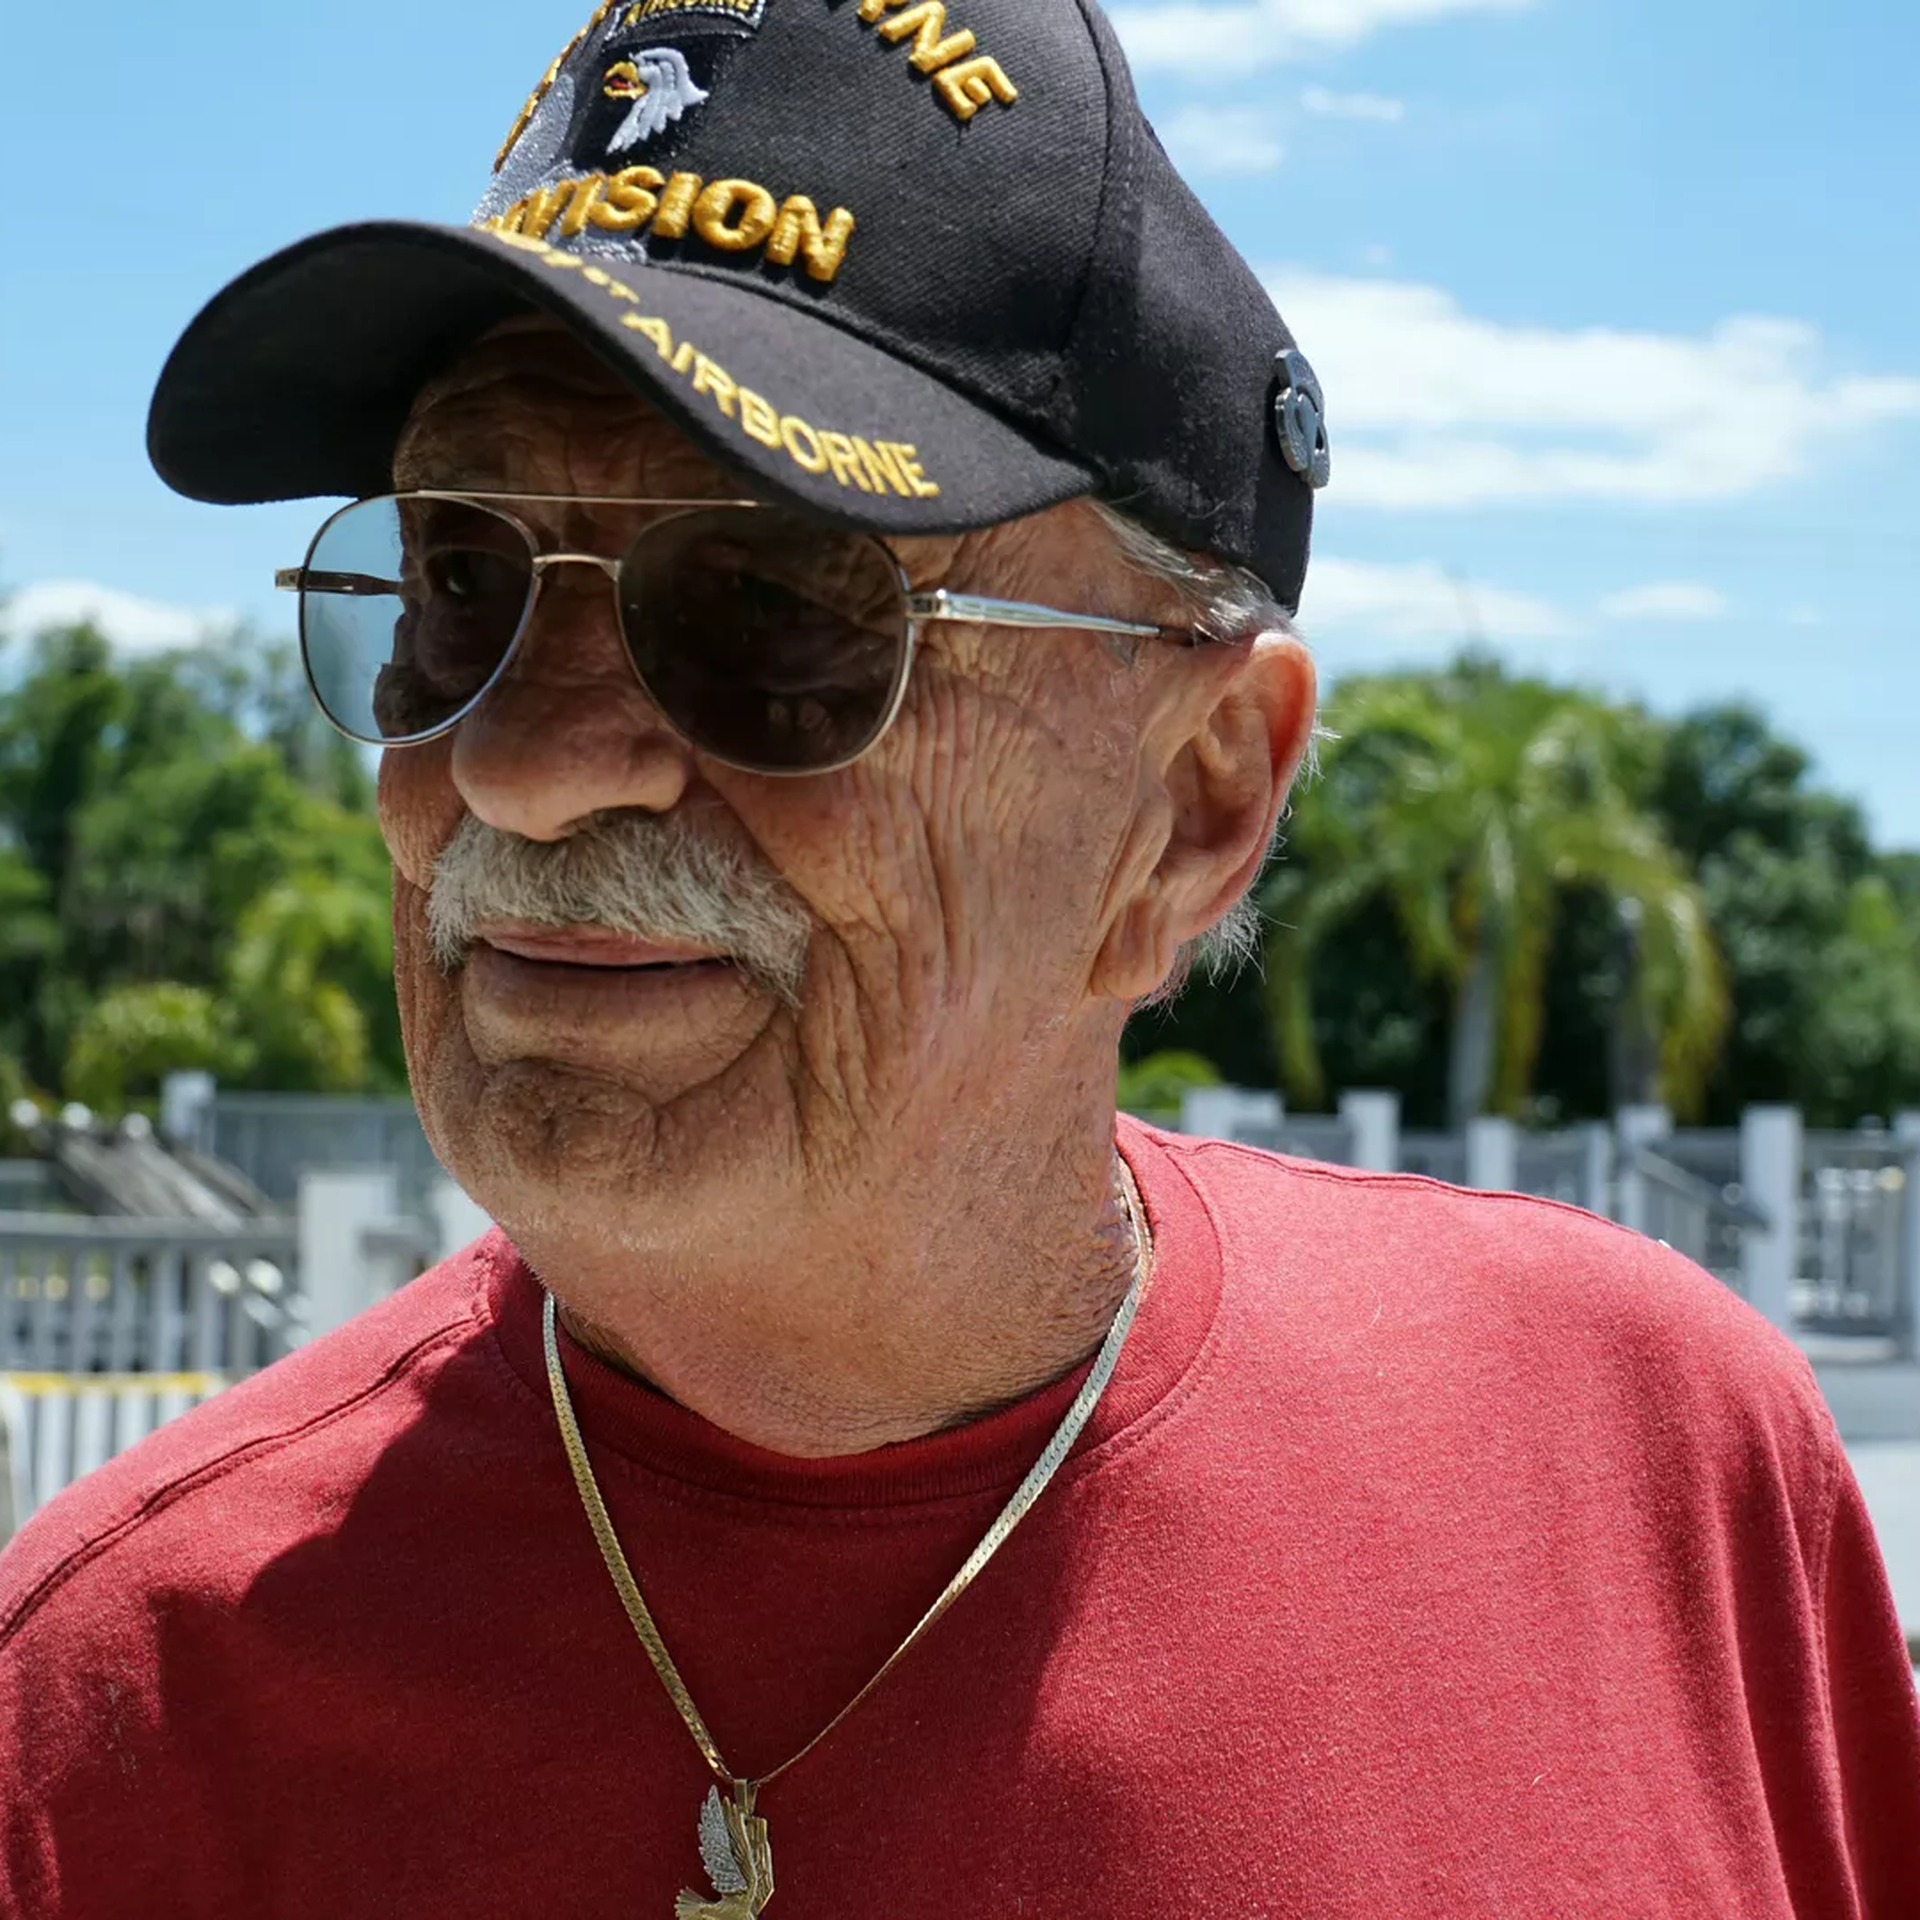 An older man with a mustache and a red t-shirt wearing a hat and glasses